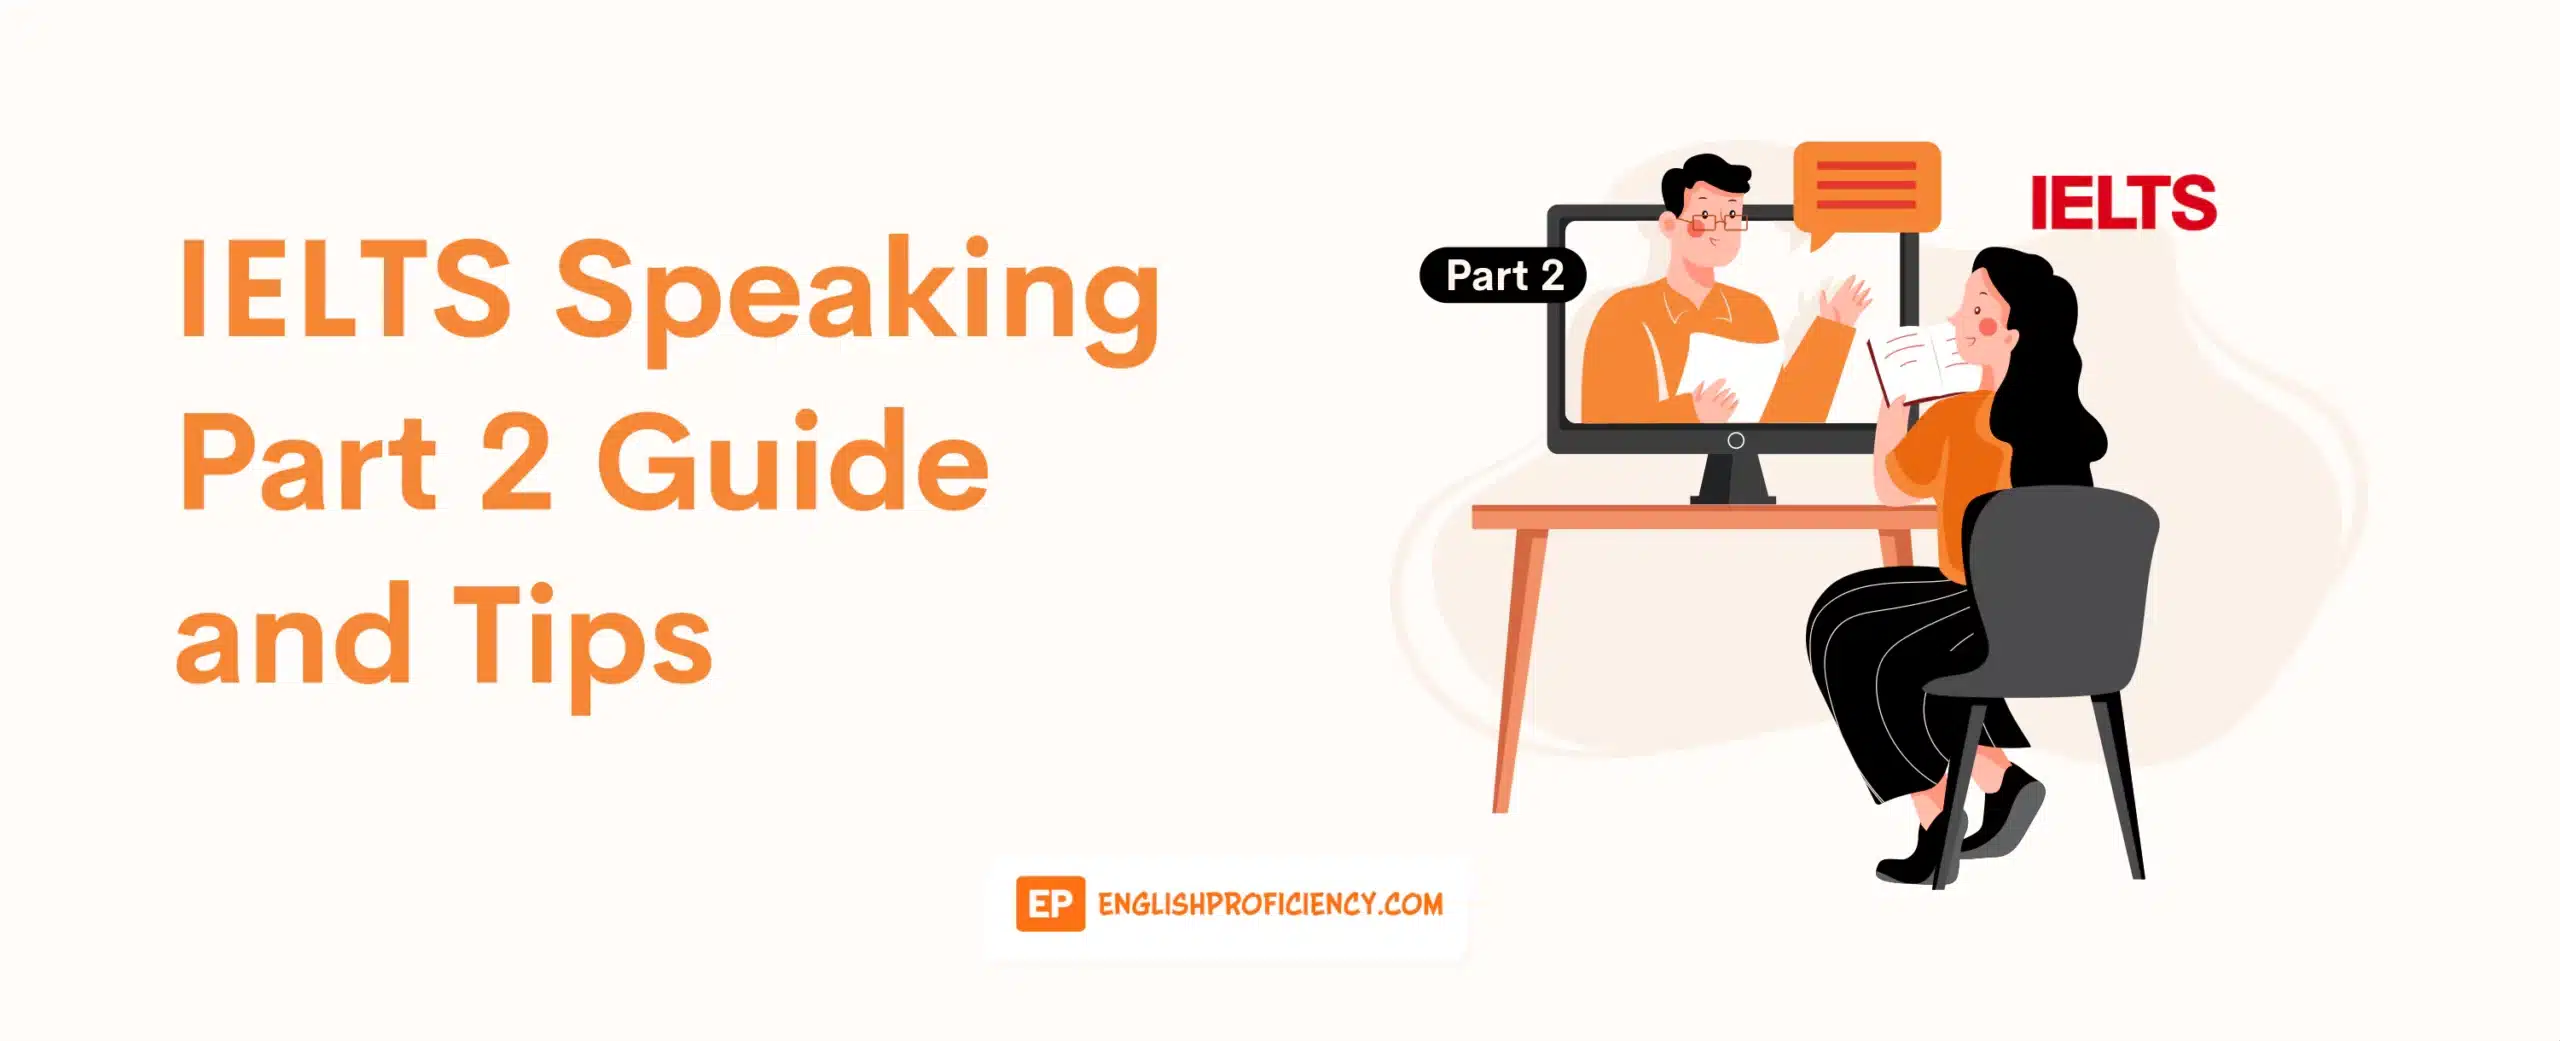 IELTS Speaking Part 2 Guide and Tips